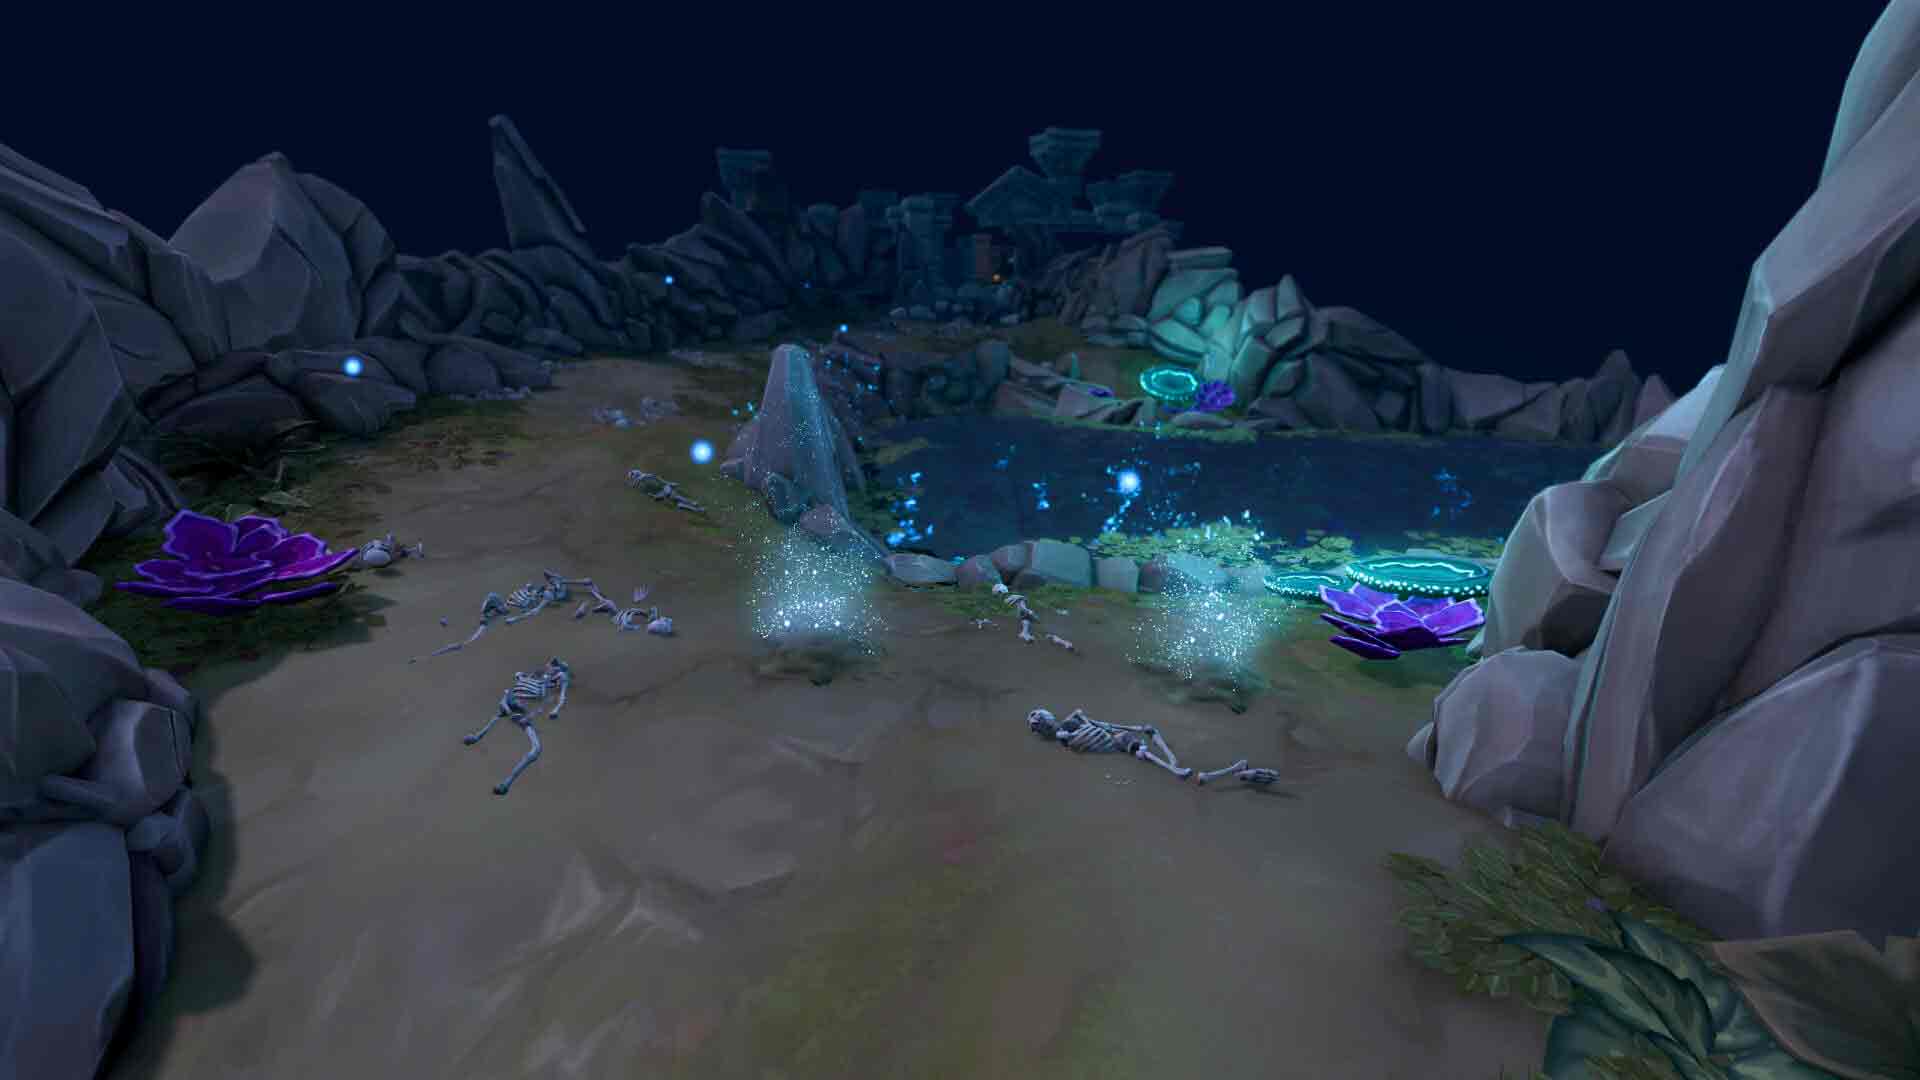 RuneScape Archaeology dig site